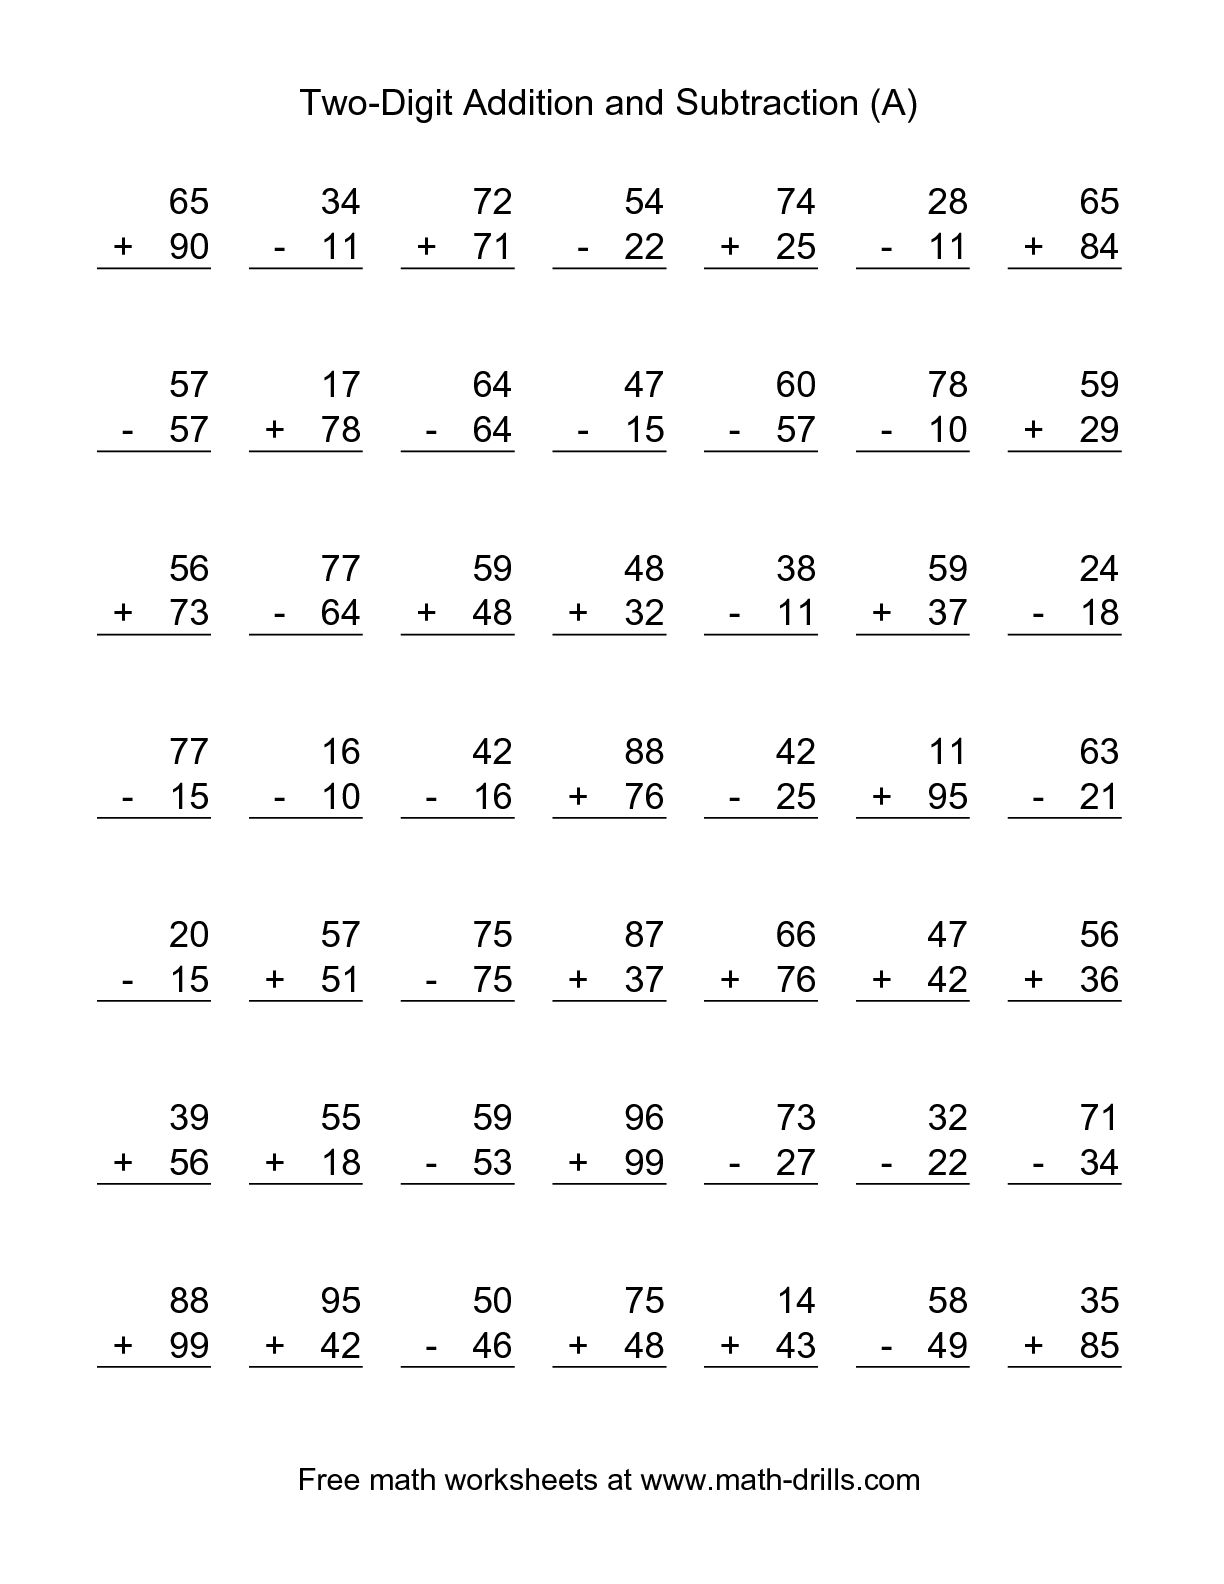 Double Addition and Subtraction Worksheets Image